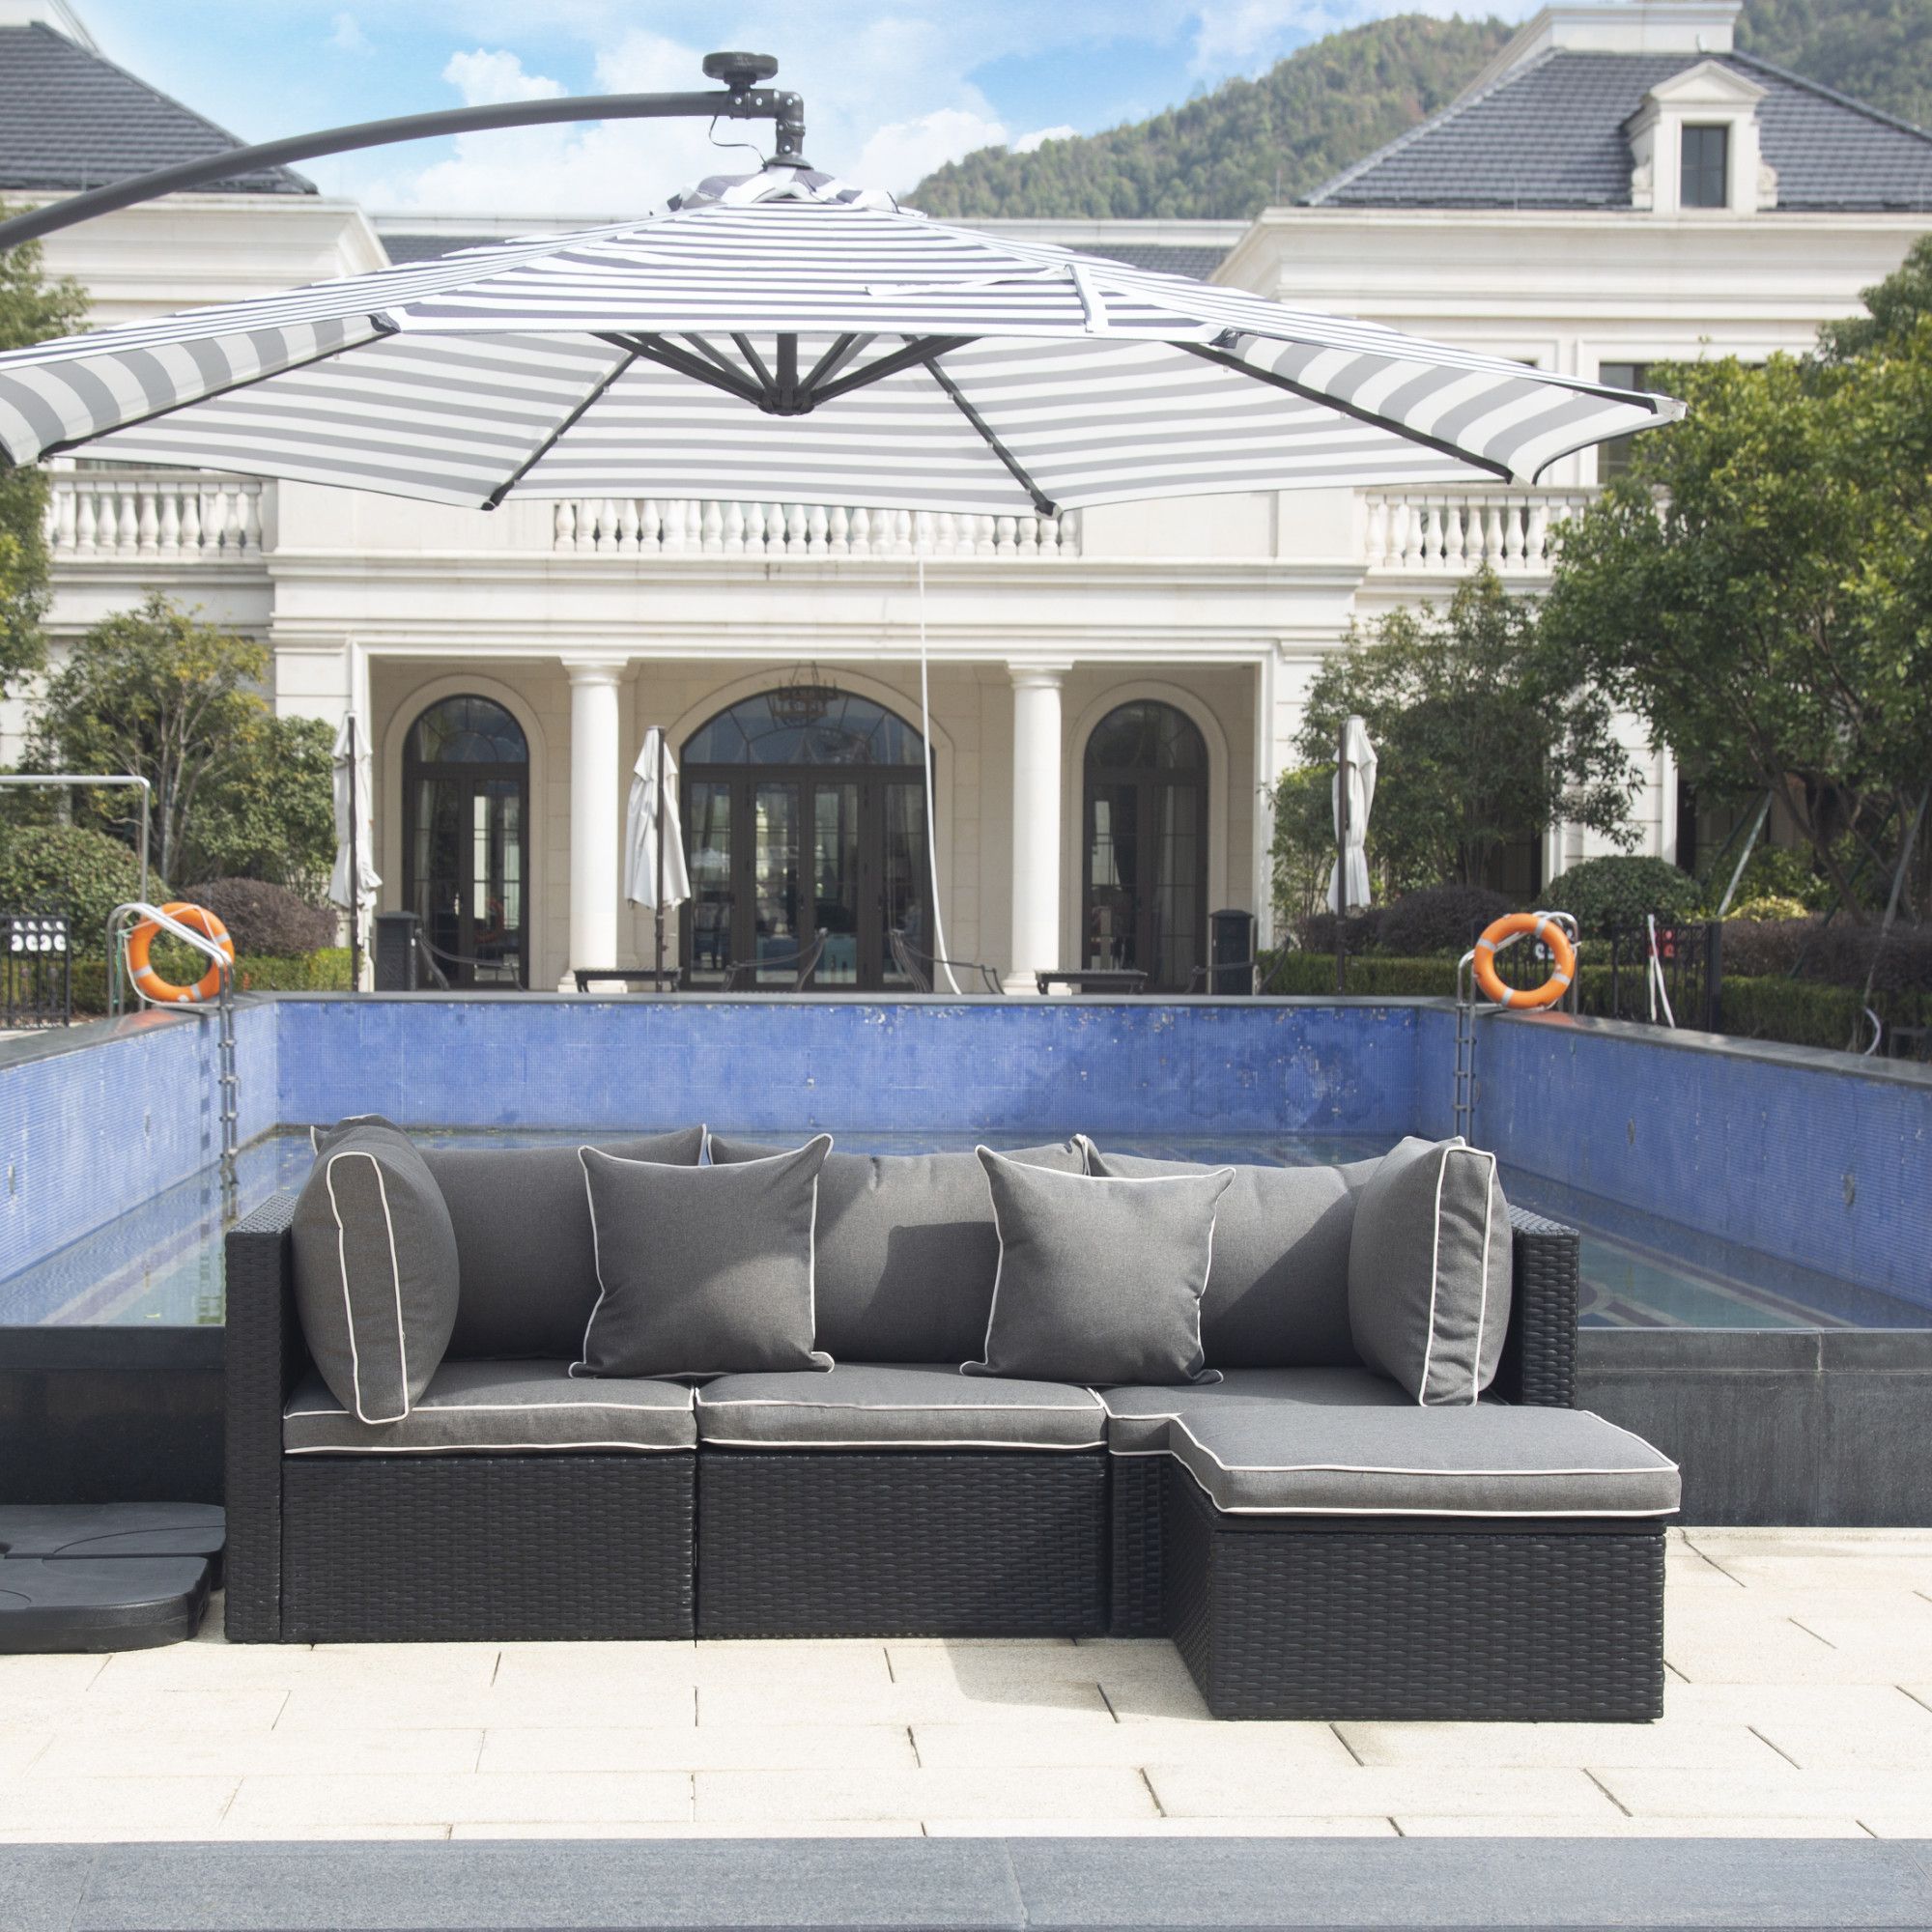 Westintrends 4Pc Outdoor Furniture Sectional Sofa Set Conversation Set Within Black Cushion Patio Conversation Sets (View 5 of 15)